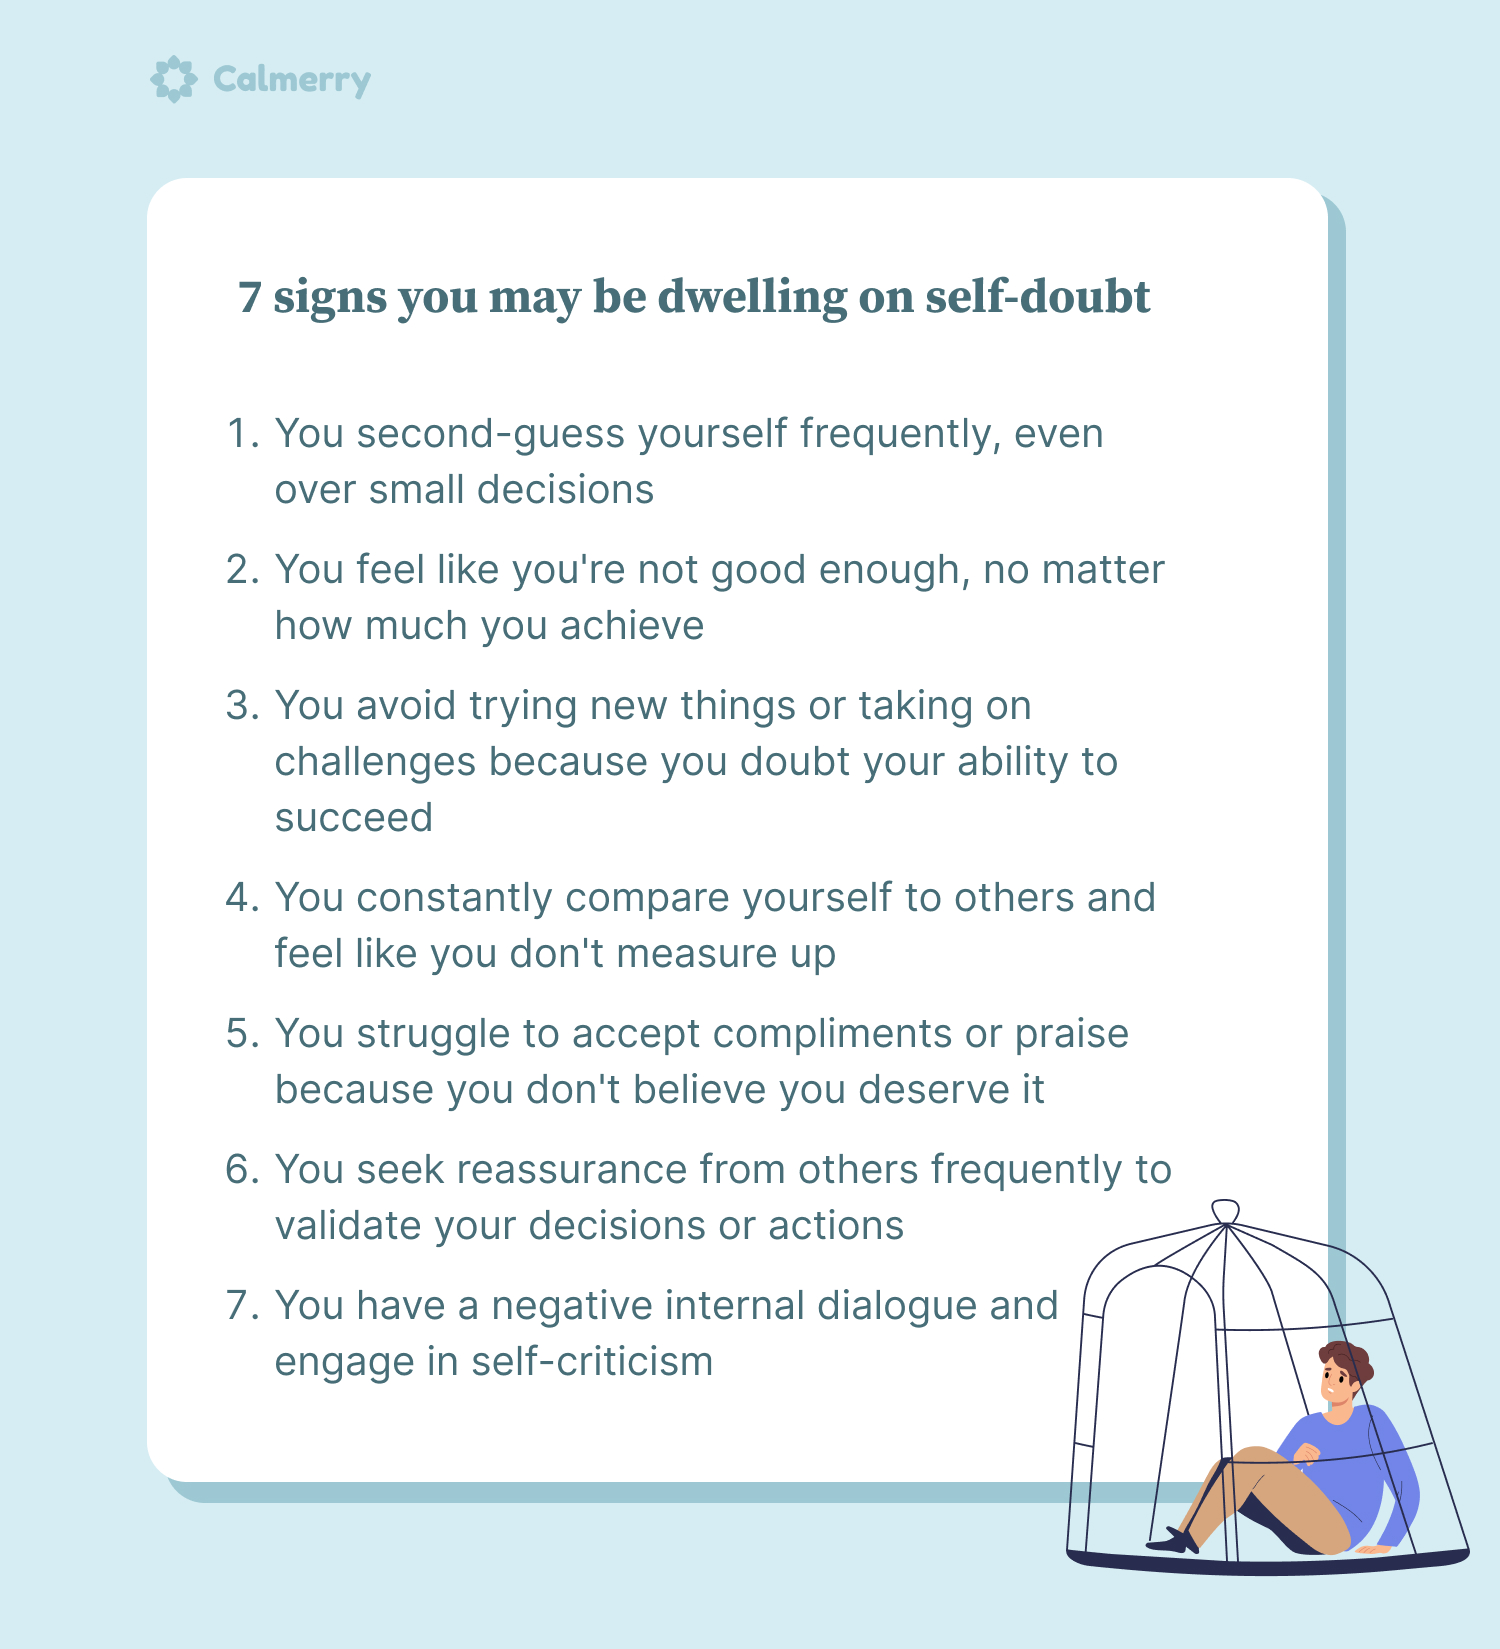 7 signs you may be dwelling on self-doubt You second-guess yourself frequently, even over small decisions You feel like you're not good enough, no matter how much you achieve You avoid trying new things or taking on challenges because you doubt your ability to succeed You constantly compare yourself to others and feel like you don't measure up You struggle to accept compliments or praise because you don't believe you deserve it You seek reassurance from others frequently to validate your decisions or actions You have a negative internal dialogue and engage in self-criticism